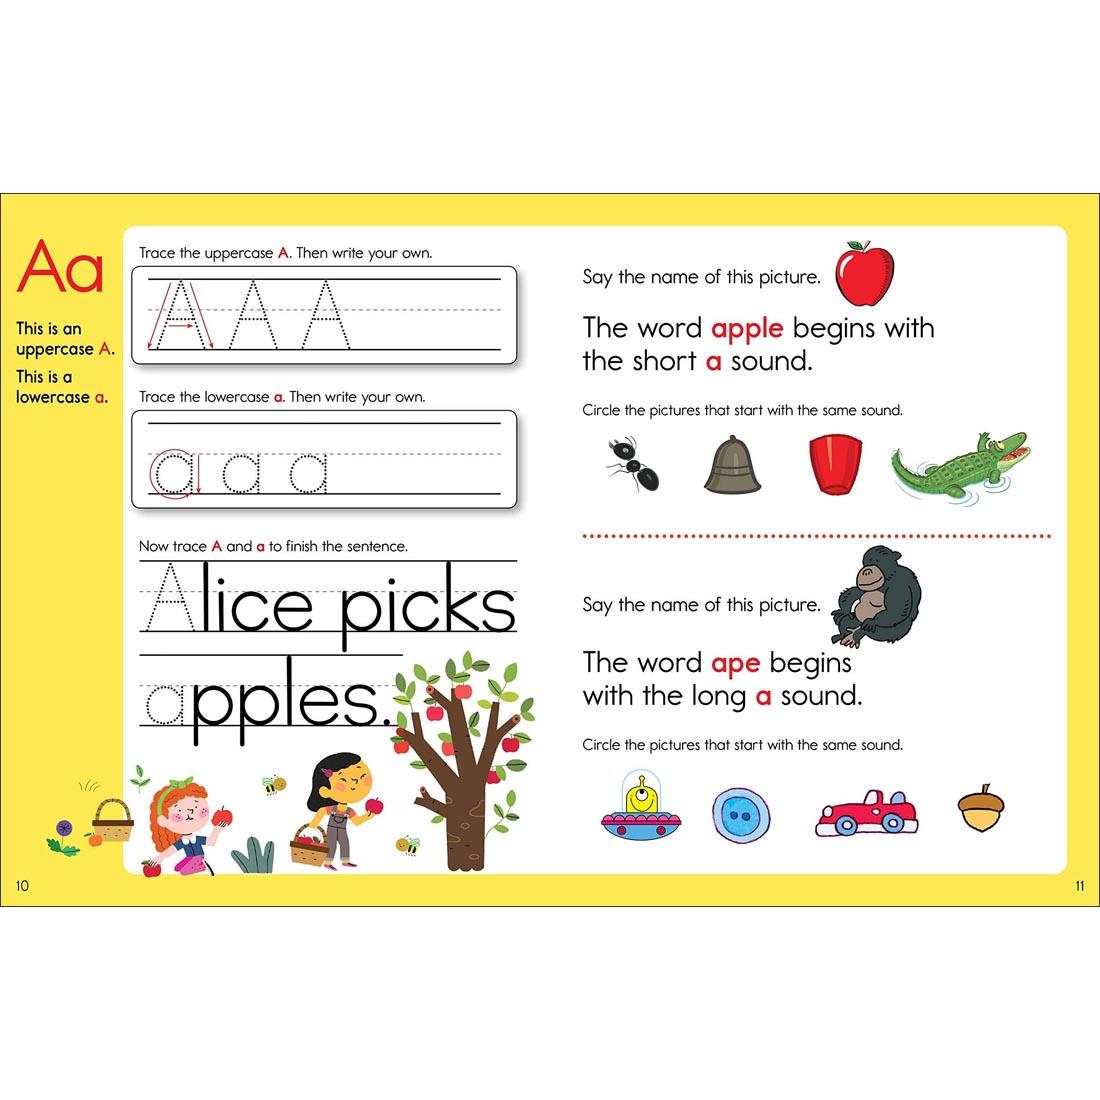 pages from inside the Highlights The Big Fun Kindergarten Workbook